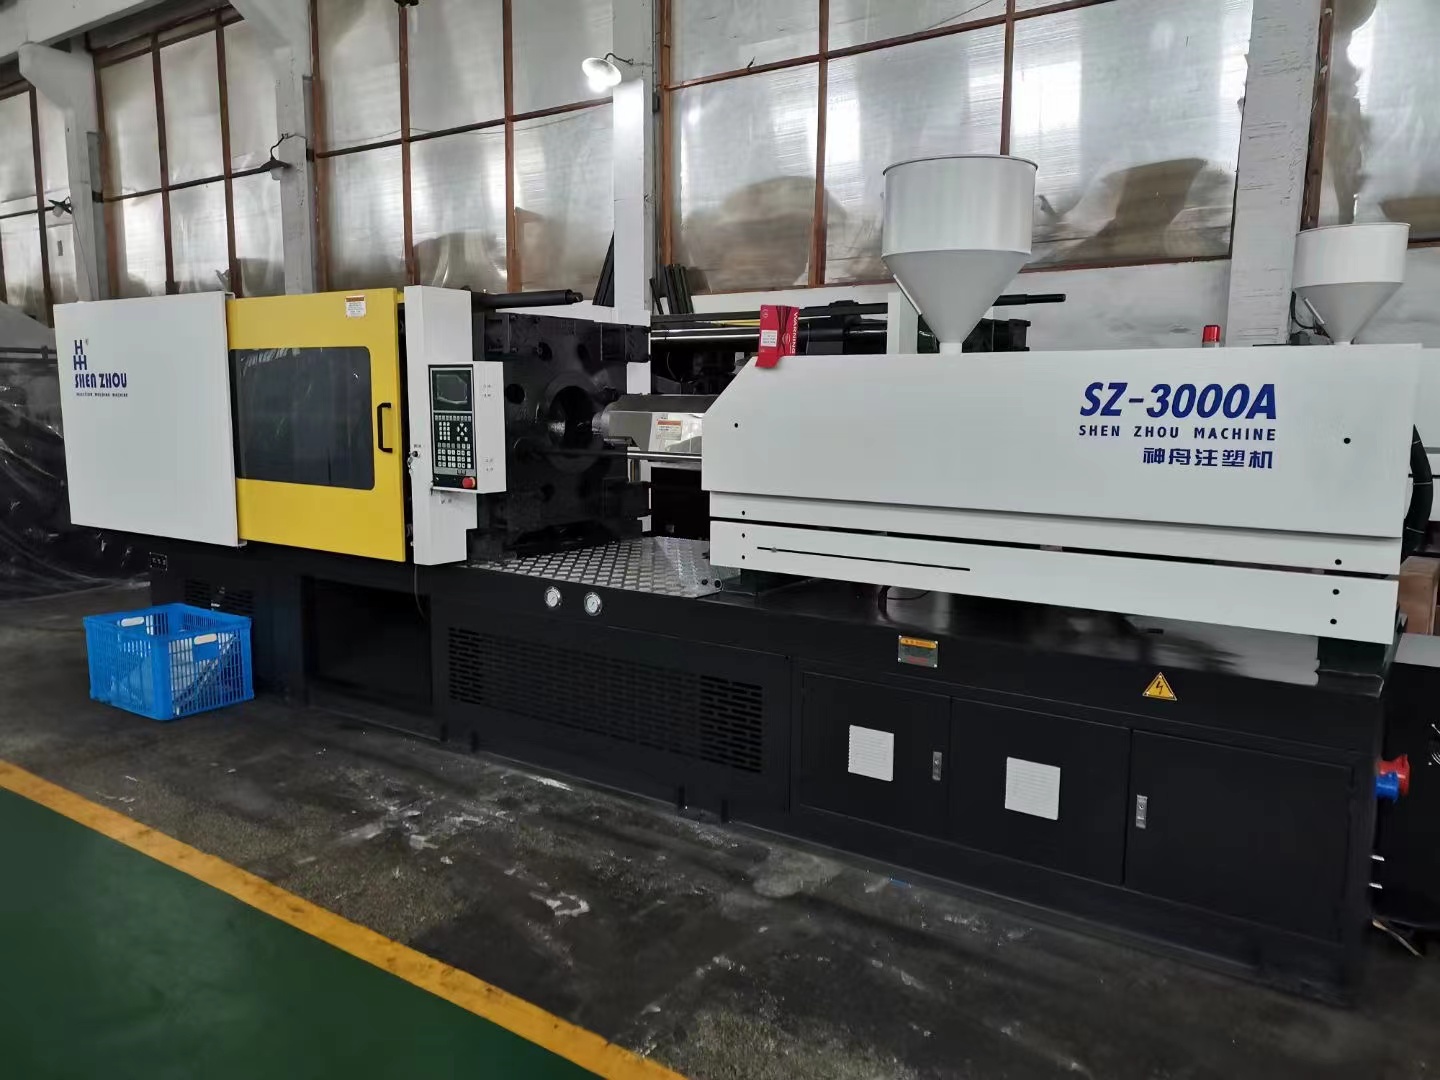 Pipe Fitting Injection Molding Machine